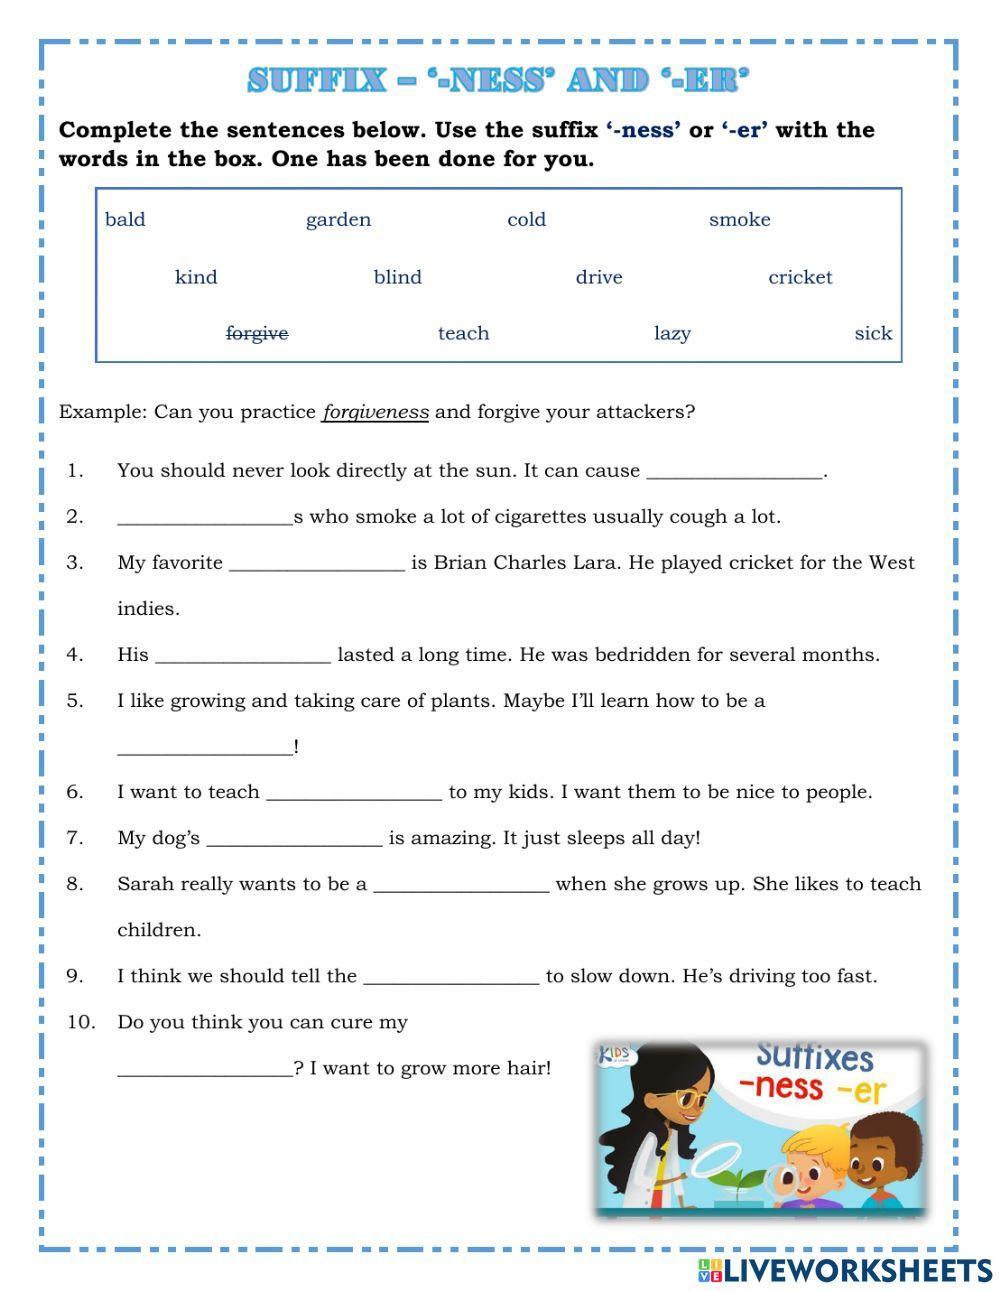 Suffix '-er' and '-ness' Worksheet